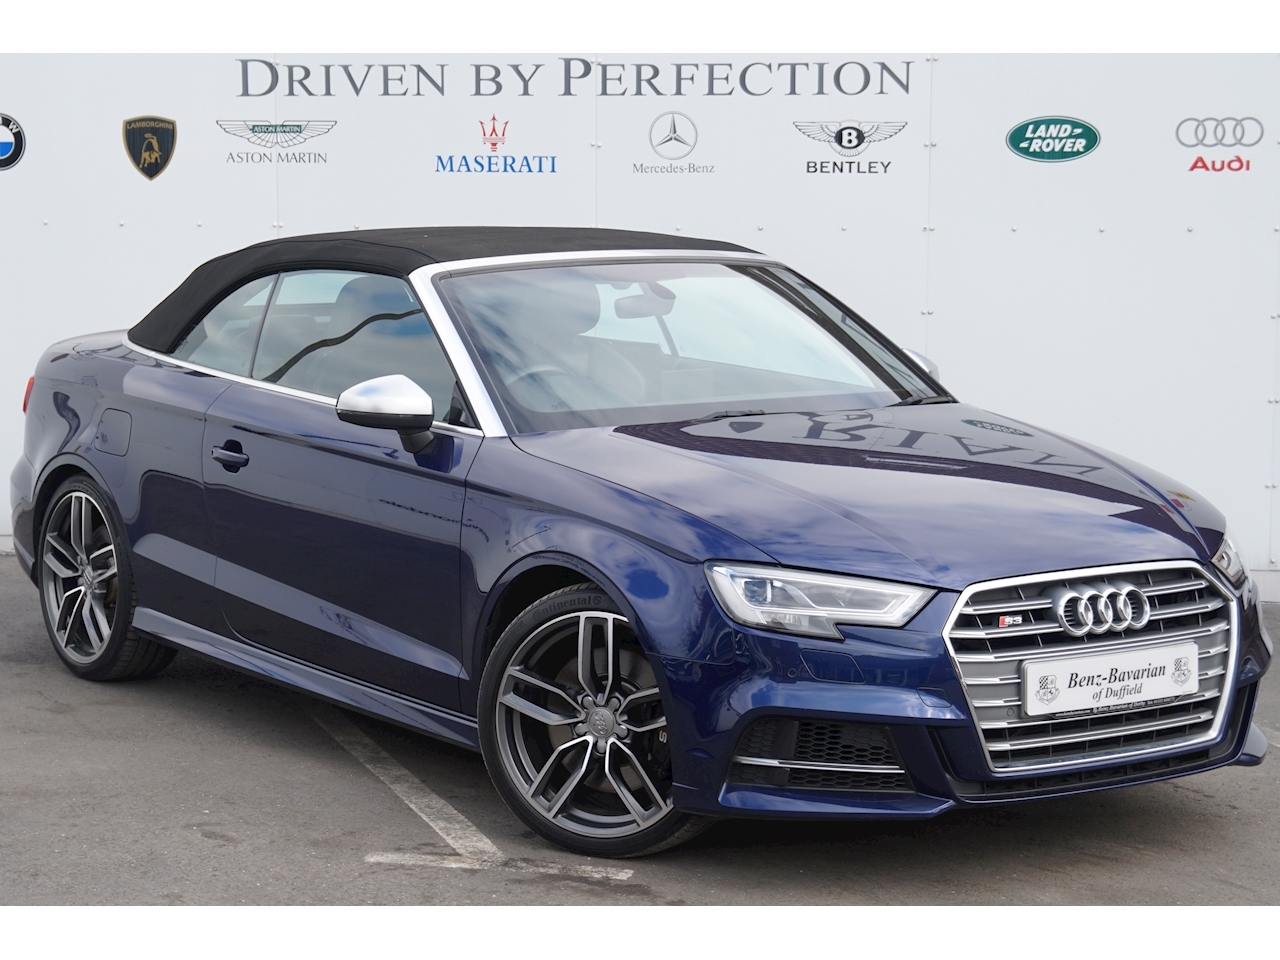 2.0 TFSI Cabriolet 2dr Petrol S Tronic quattro (s/s) (310 ps)